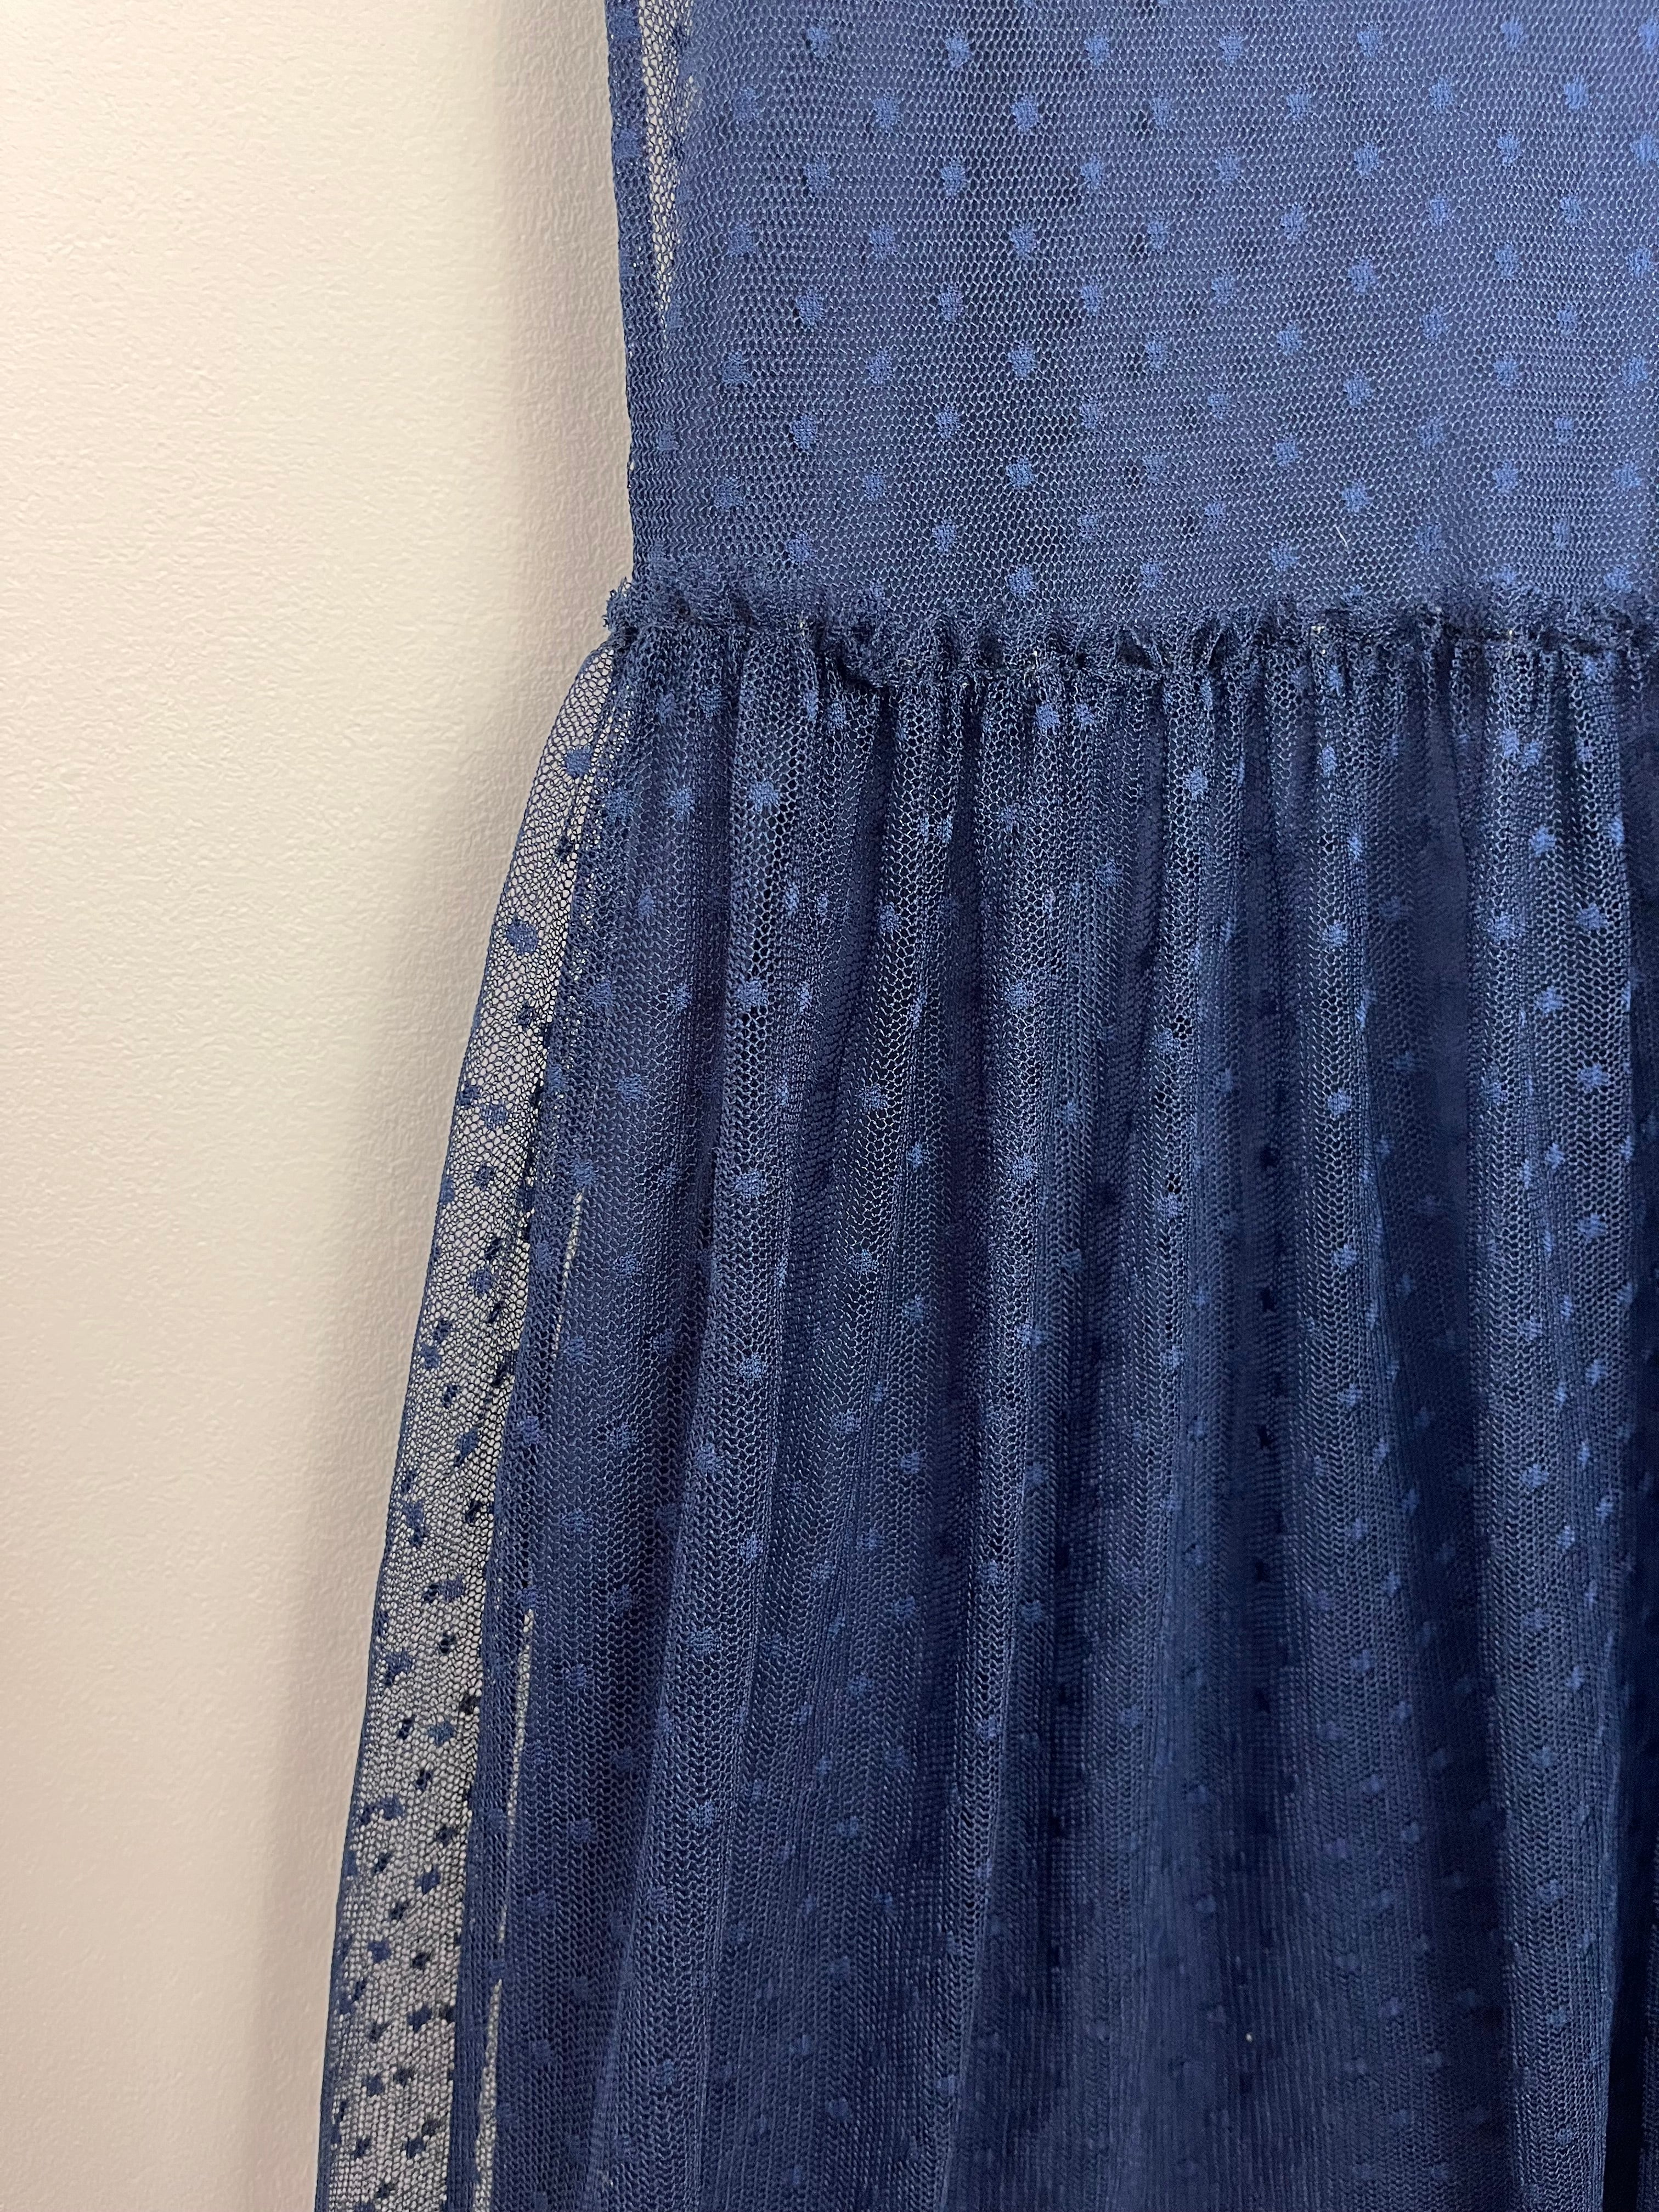 Blue Zoo 12-13 Years-Dresses-Second Snuggle Preloved